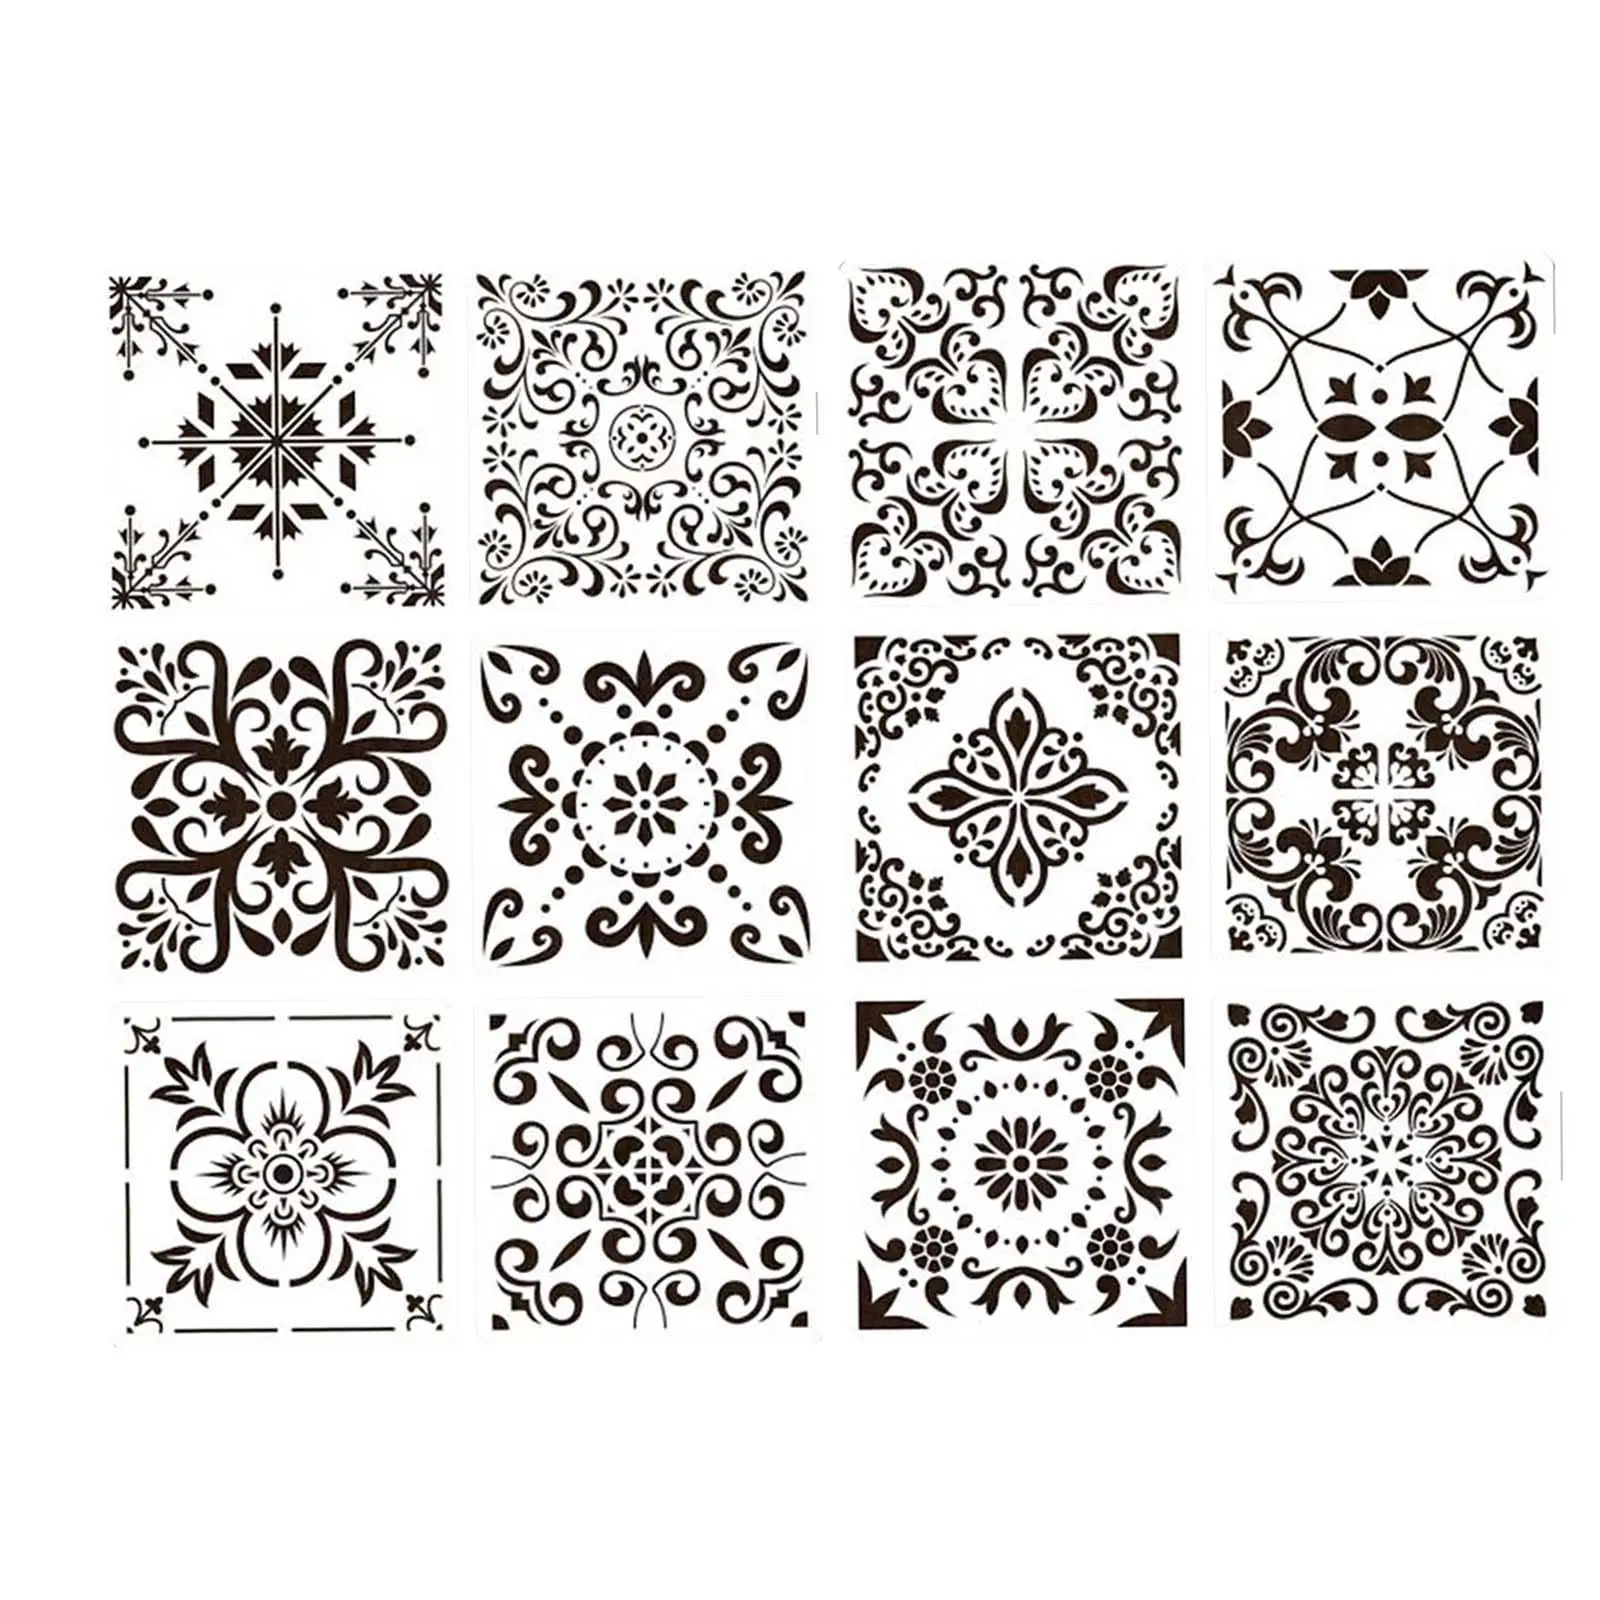 12Pcs Fashion Mandala Stencil Template DIY Craft Tool Handmade Reused Drawing Templates for School Wood Fabric Party Decoration